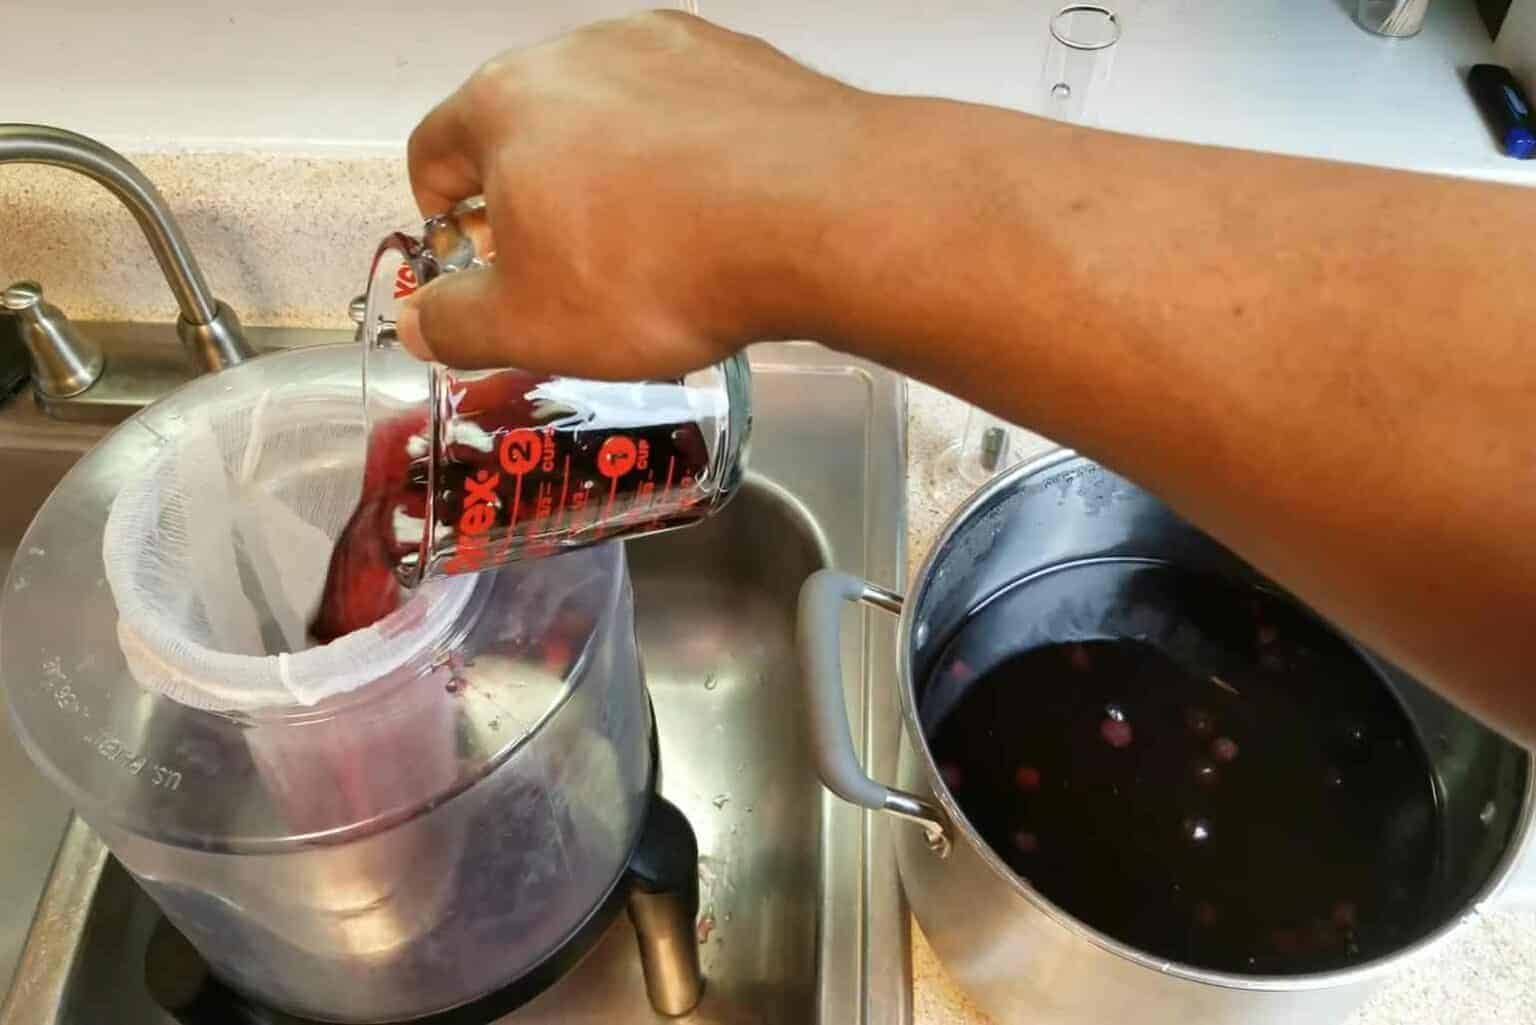 Once-the-blueberry-juice-has-cooled-down-you-can-transfer-it-to-a-fermenter-jug-using-a-strainer-cloth-so-the-berries-will-be-blocked-from-it